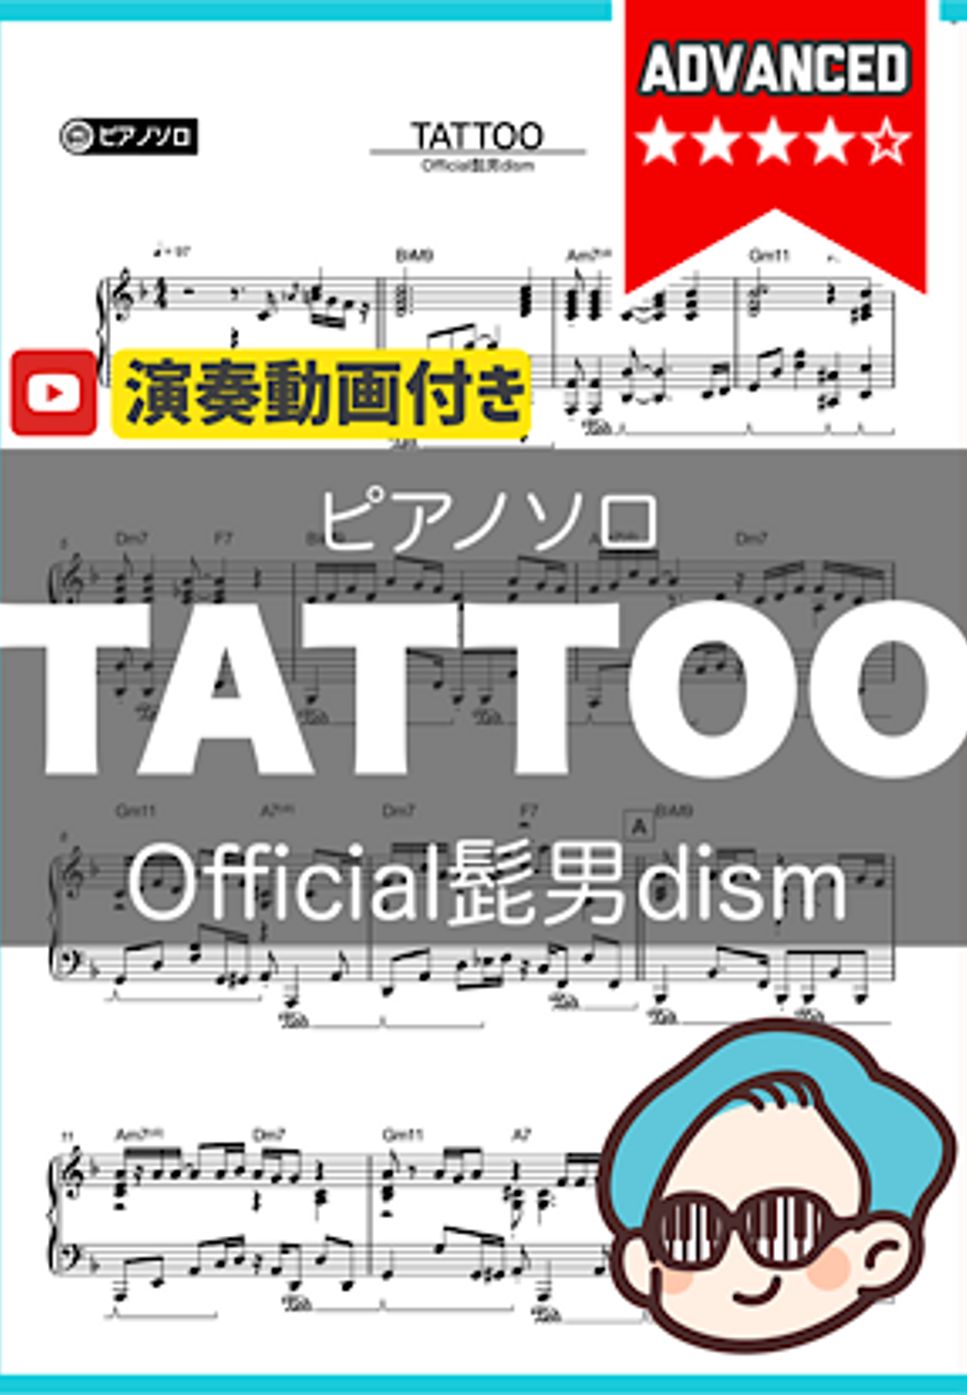 Official髭男dism - TATTOO by シータピアノ